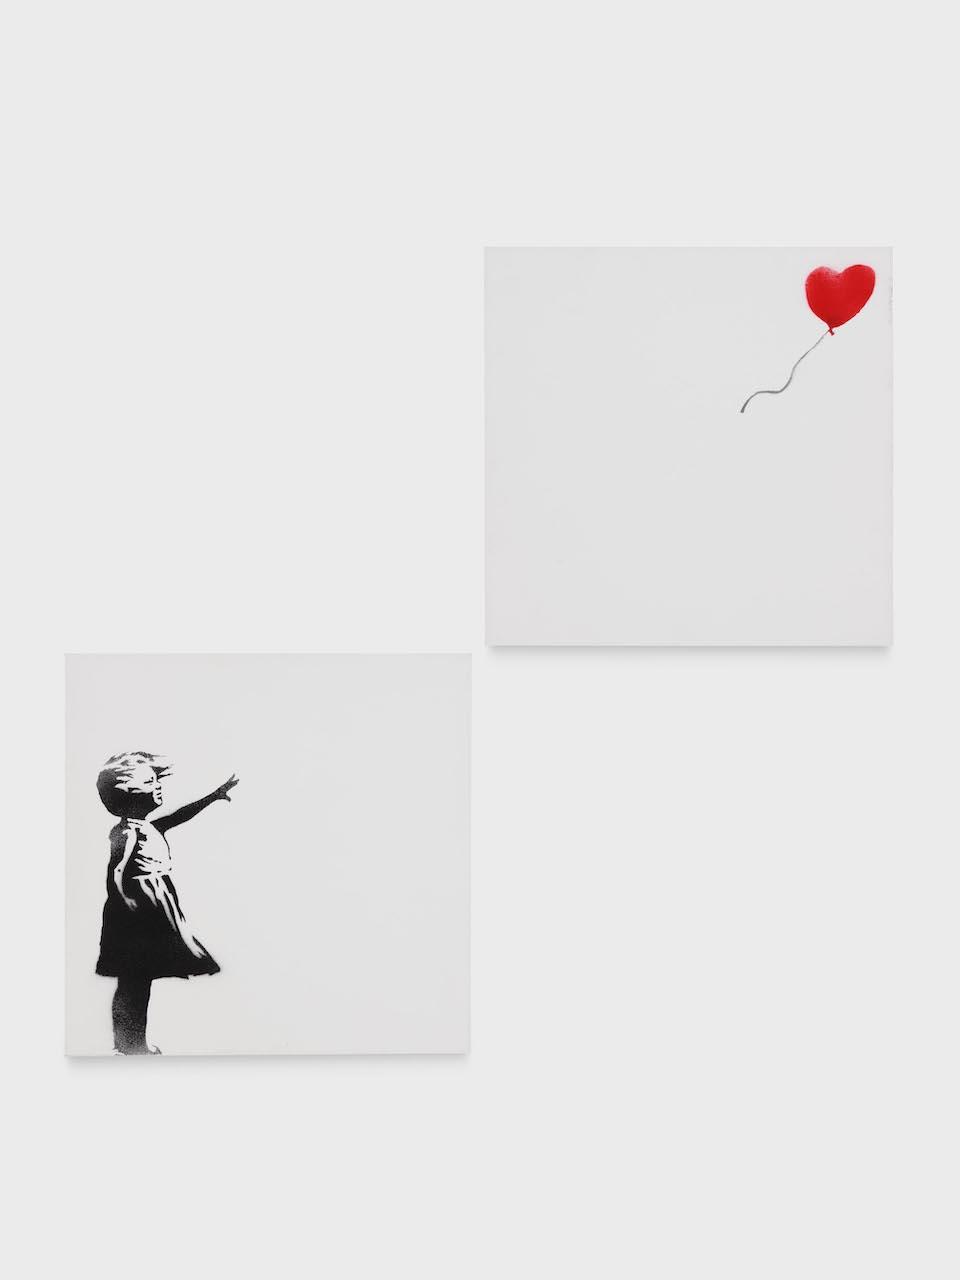 Banksy’s Flower Thrower and Girl with Balloon to be Showcased at Art Basel Hong Kong 2022